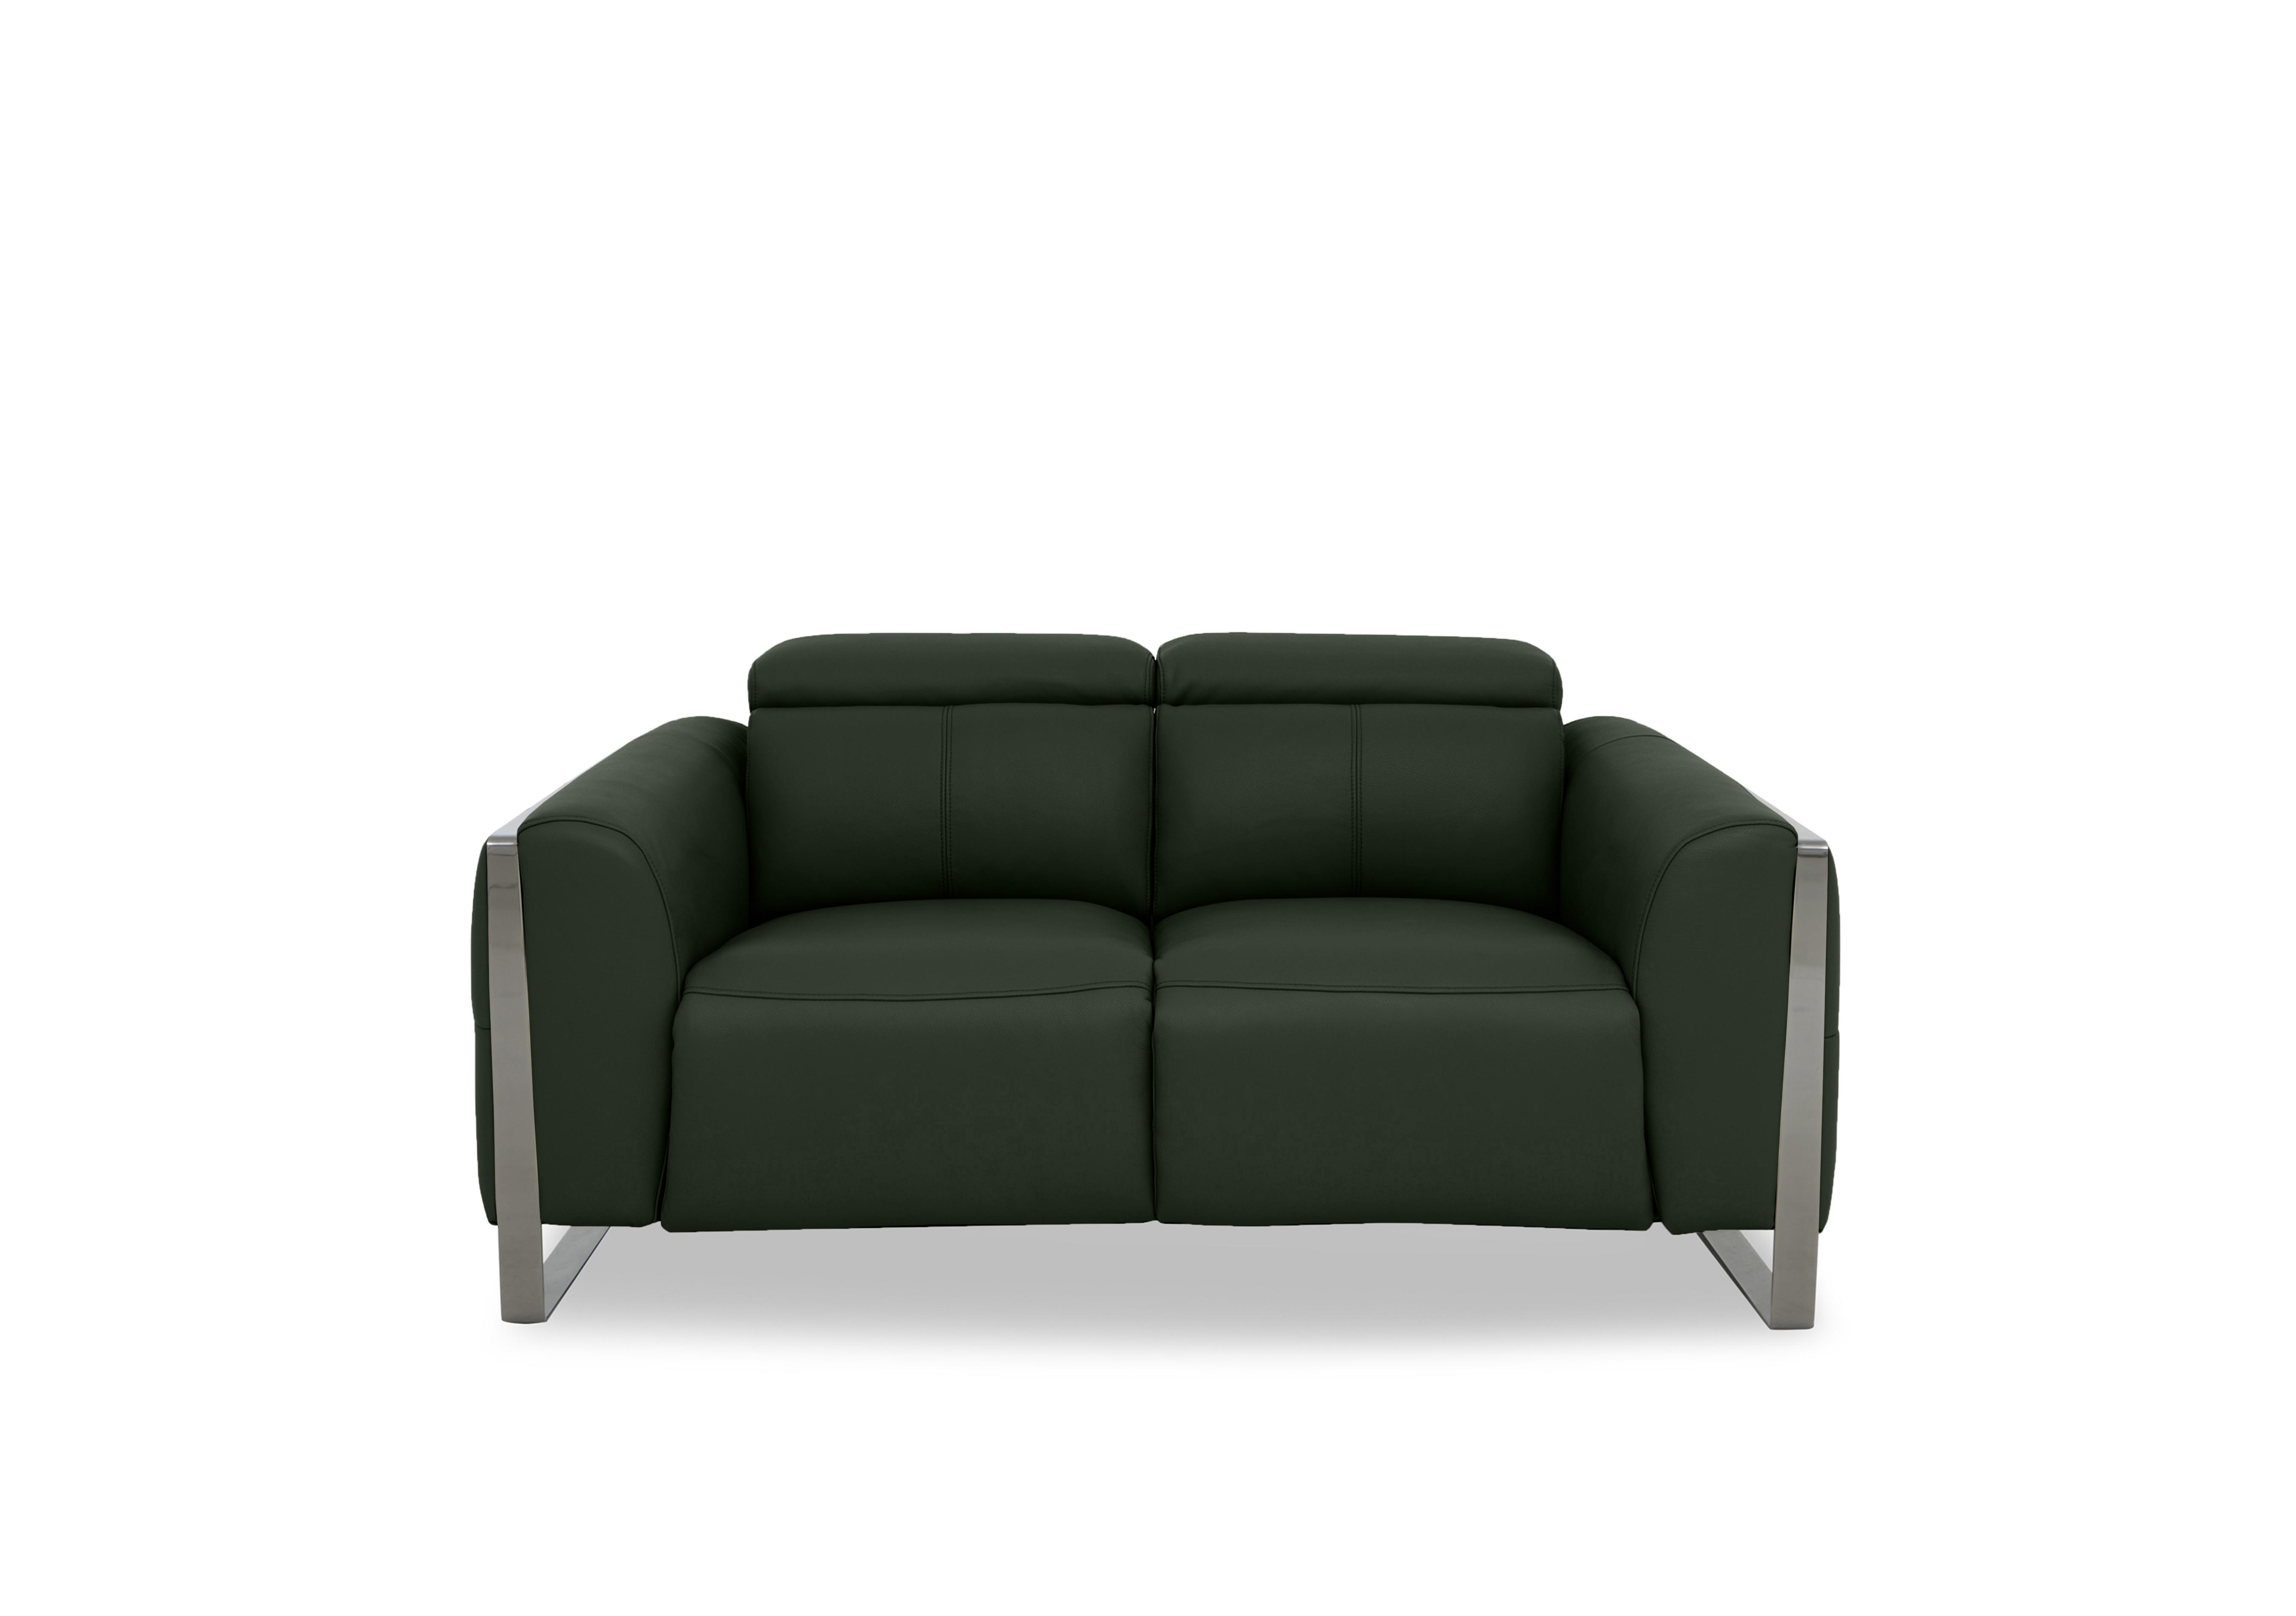 Gisella Leather 2 Seater Sofa in Cat-40/10 Oslo Pine on Furniture Village